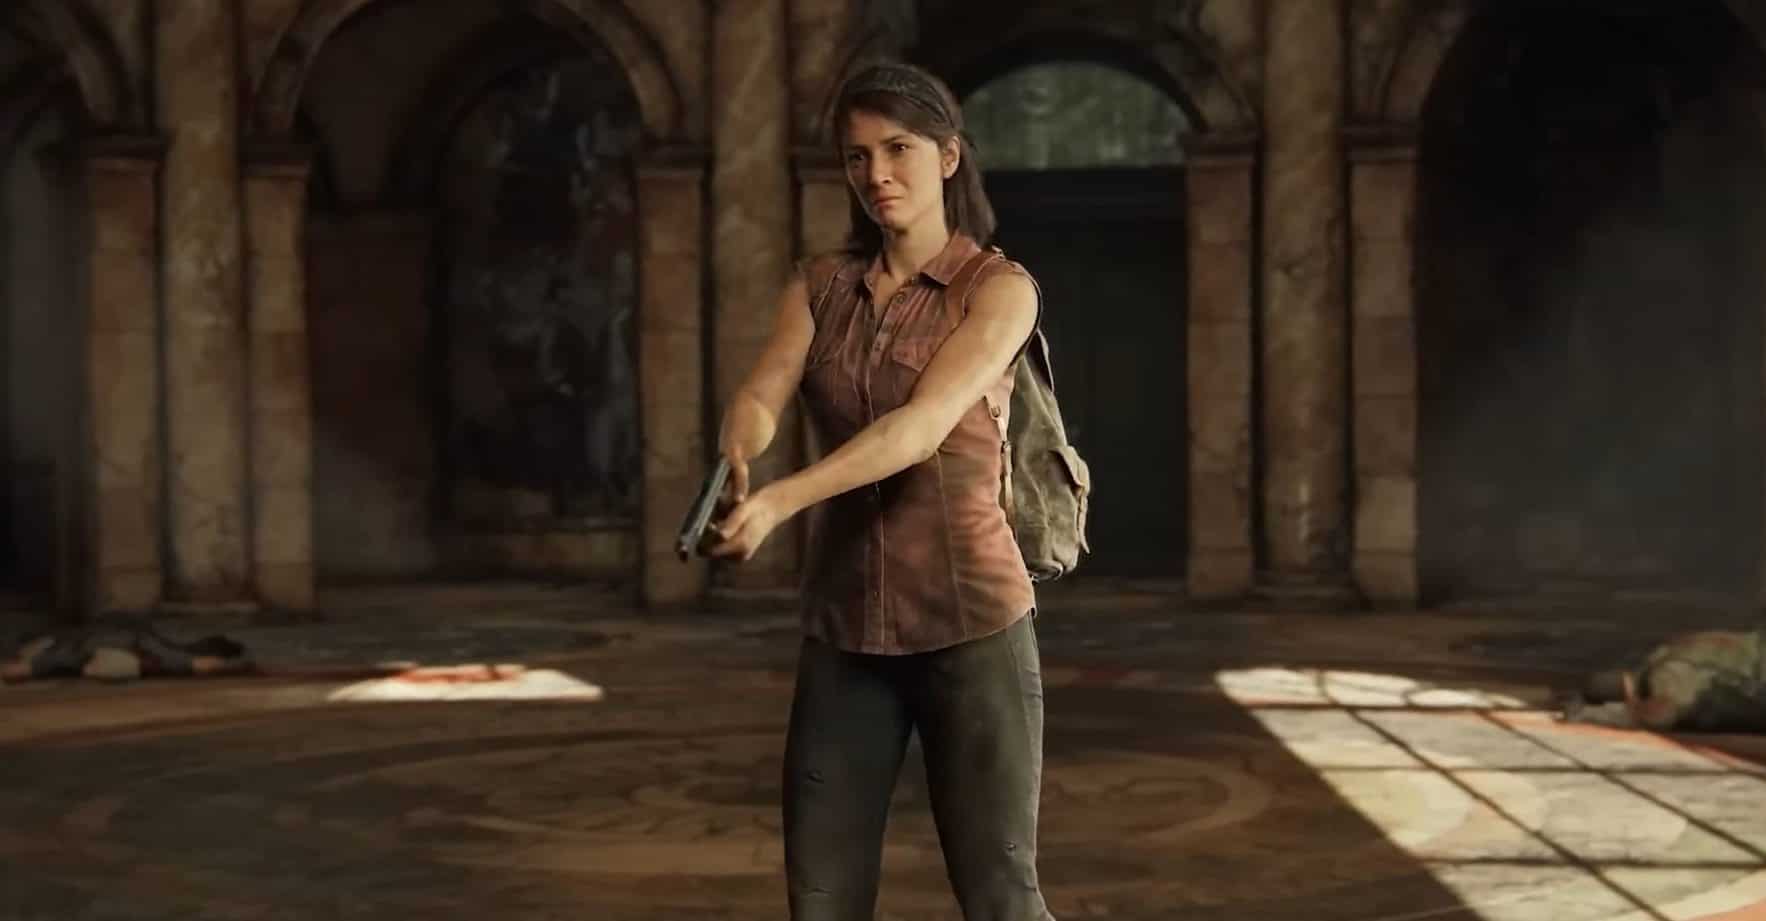 Tess' death in the Last of Us game